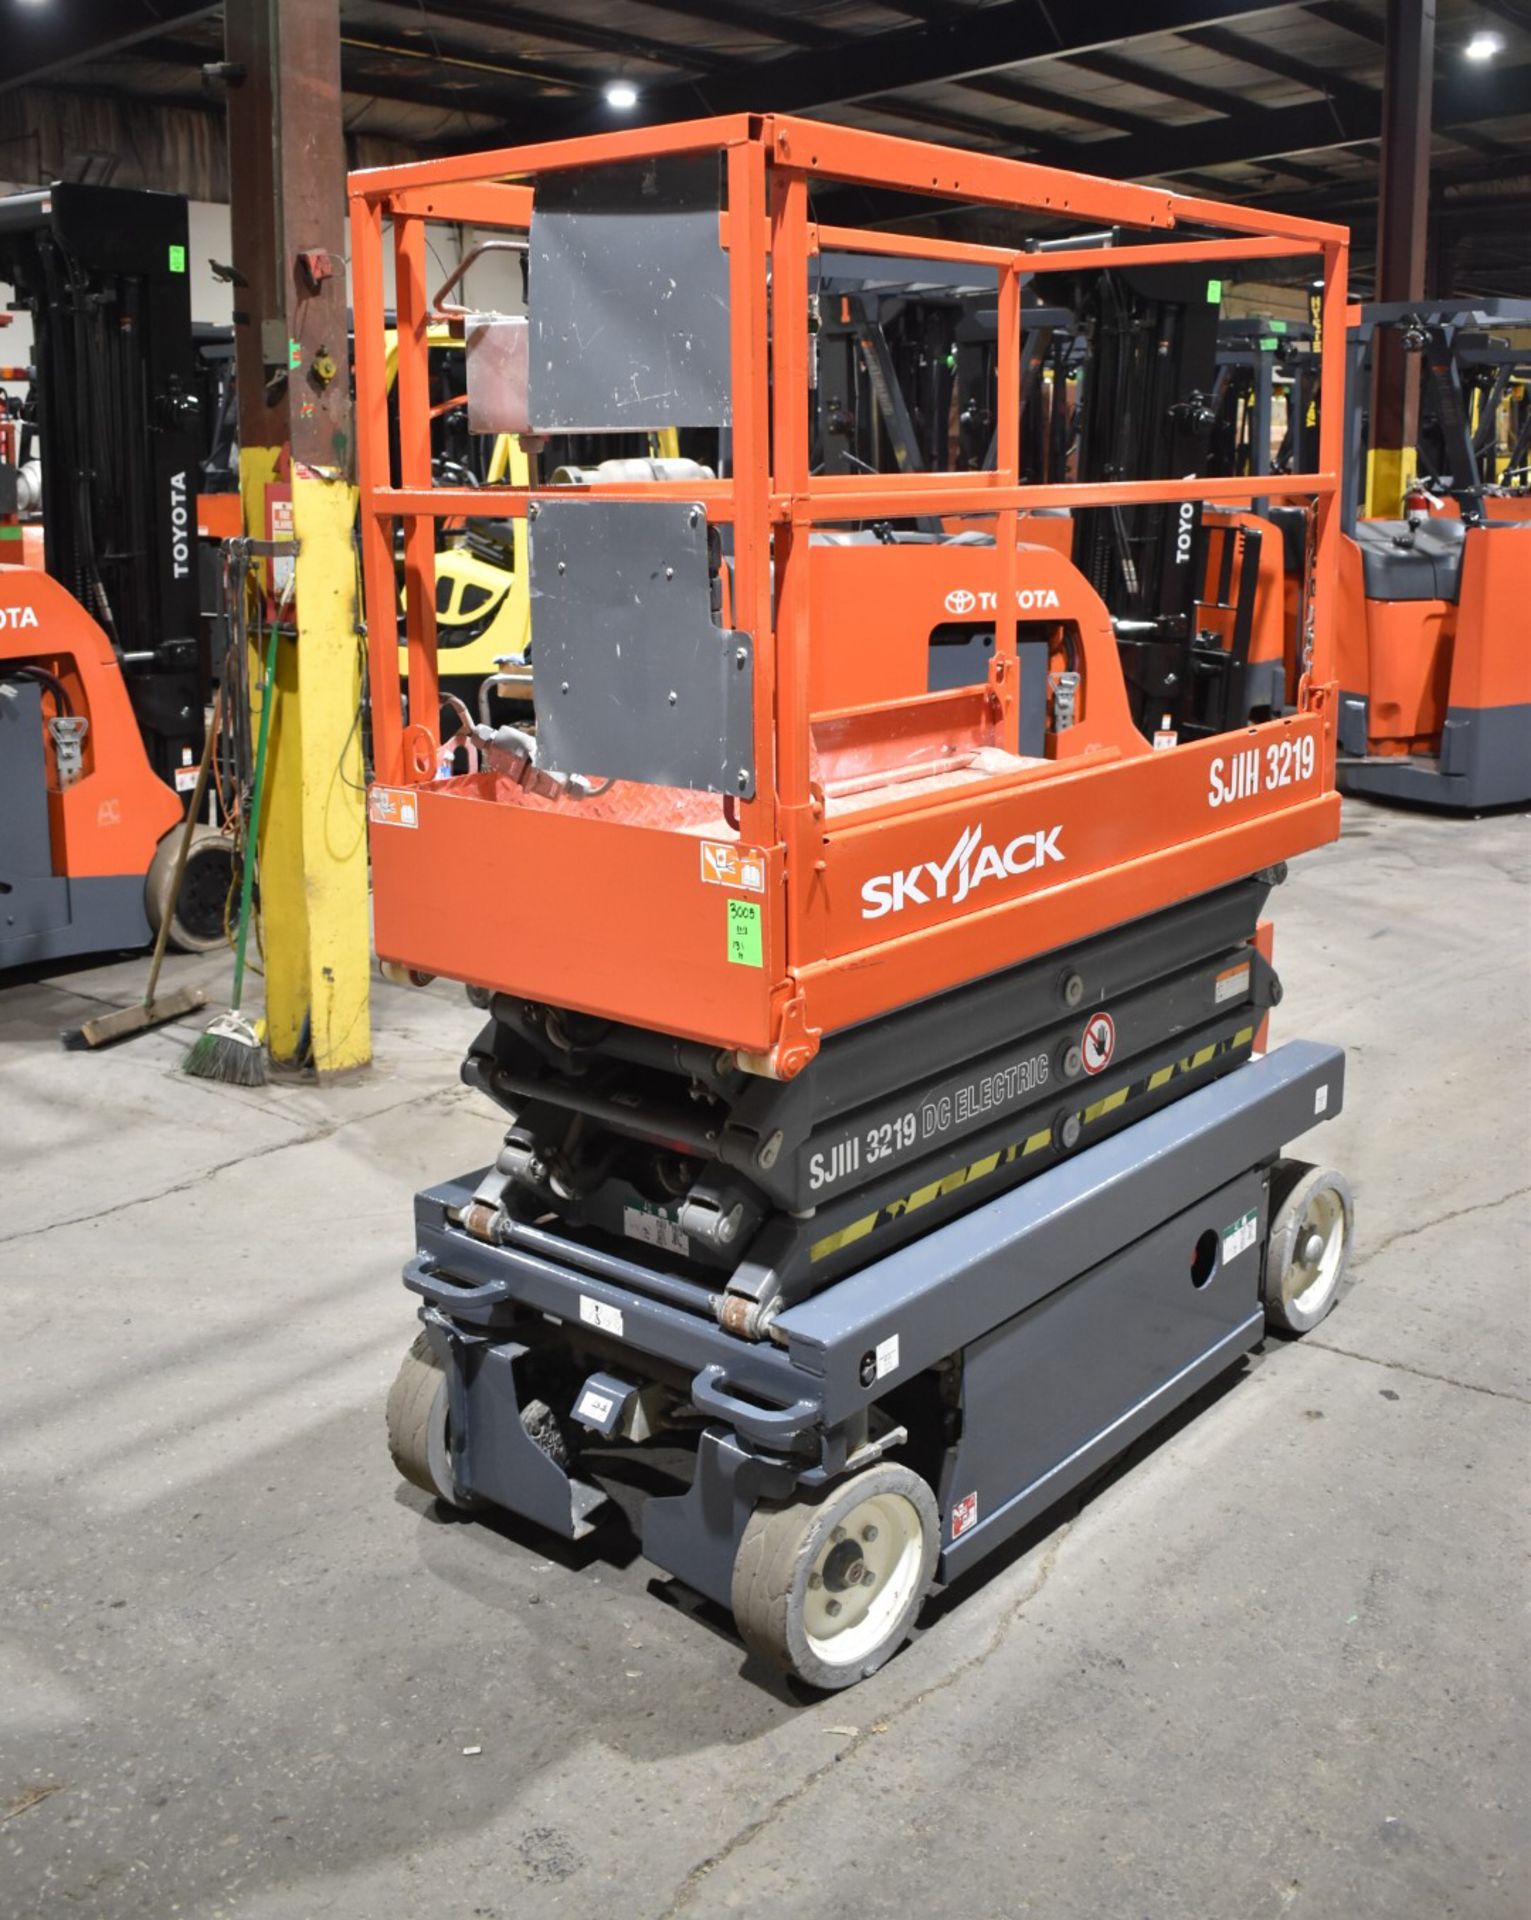 SKYJACK (2013) III 3219 ELECTRIC SCISSOR LIFT WITH 24V BATTERY, 550LBS CAPACITY, 19' MAX HEIGHT, - Image 7 of 8